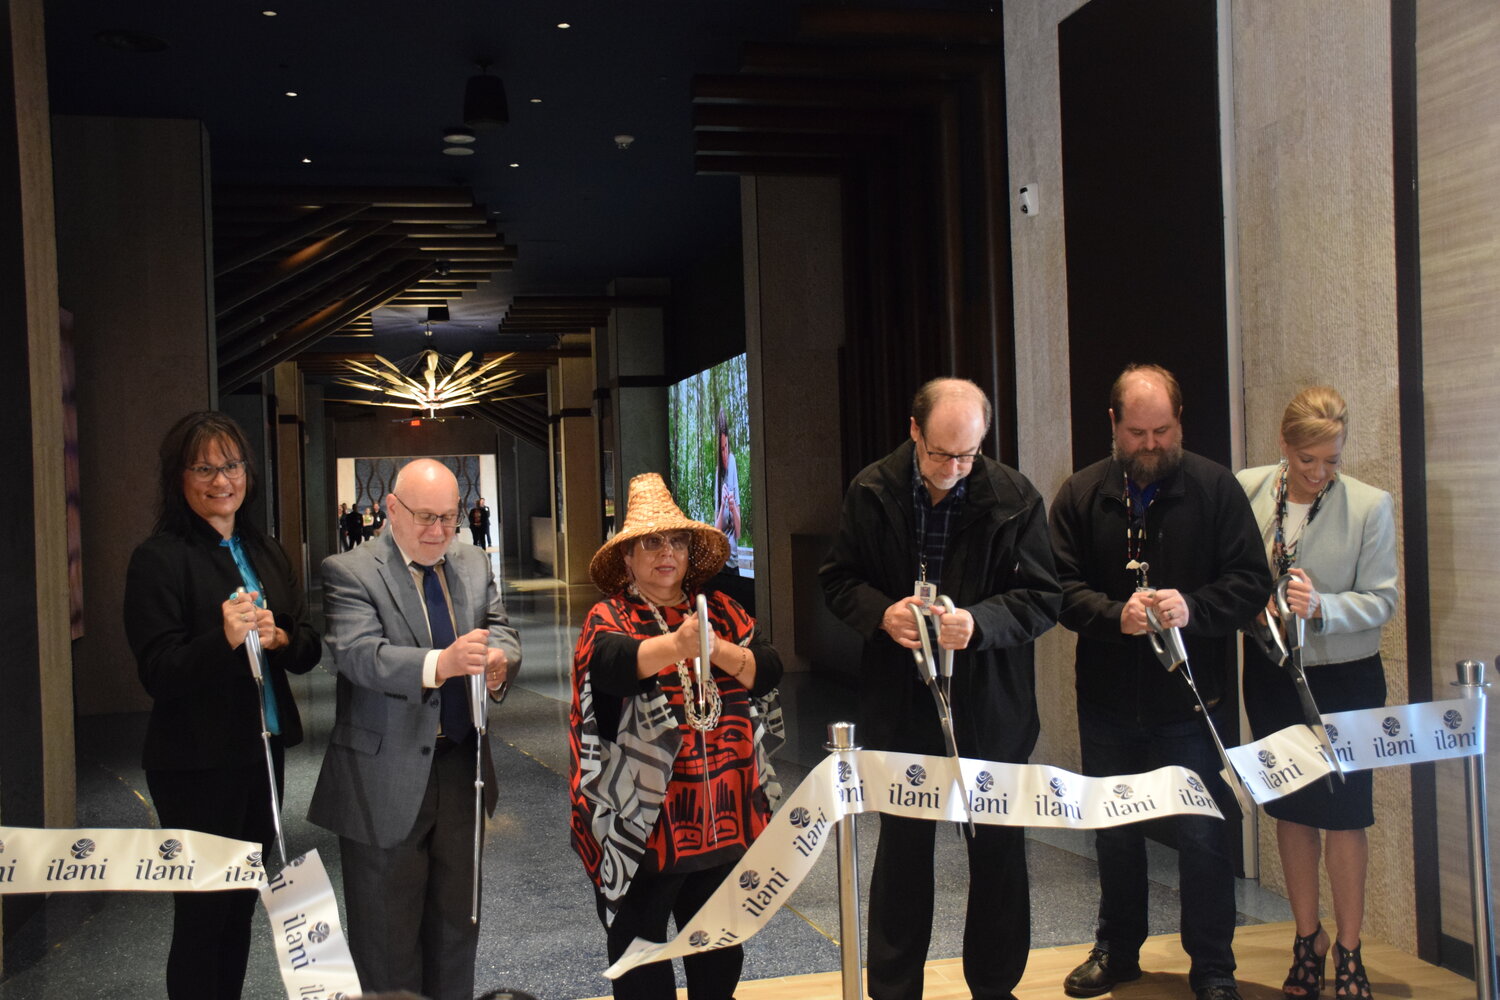 Officials cut the ribbon on ilani’s new hotel during a grand opening of the facility April 24.